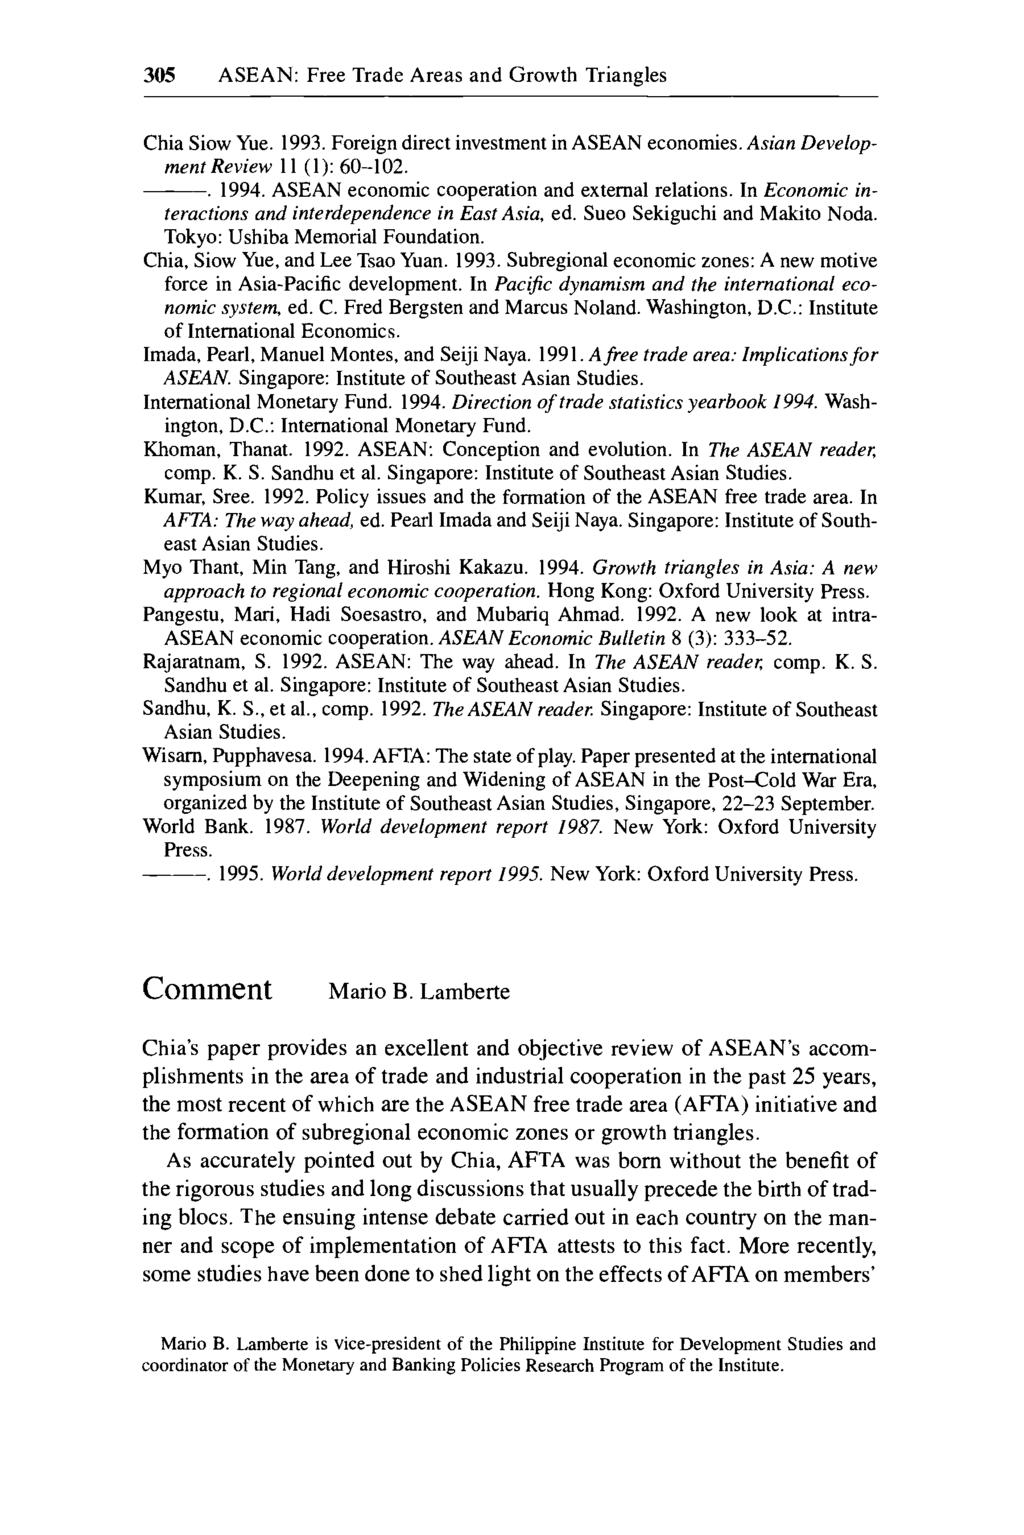 35 ASEAN: Free Trade Areas and Growth Triangles Chia Siow Yue.. Foreign direct investment in ASEAN economies. Asian Development Review 11 (1): 6-12.. 1994.